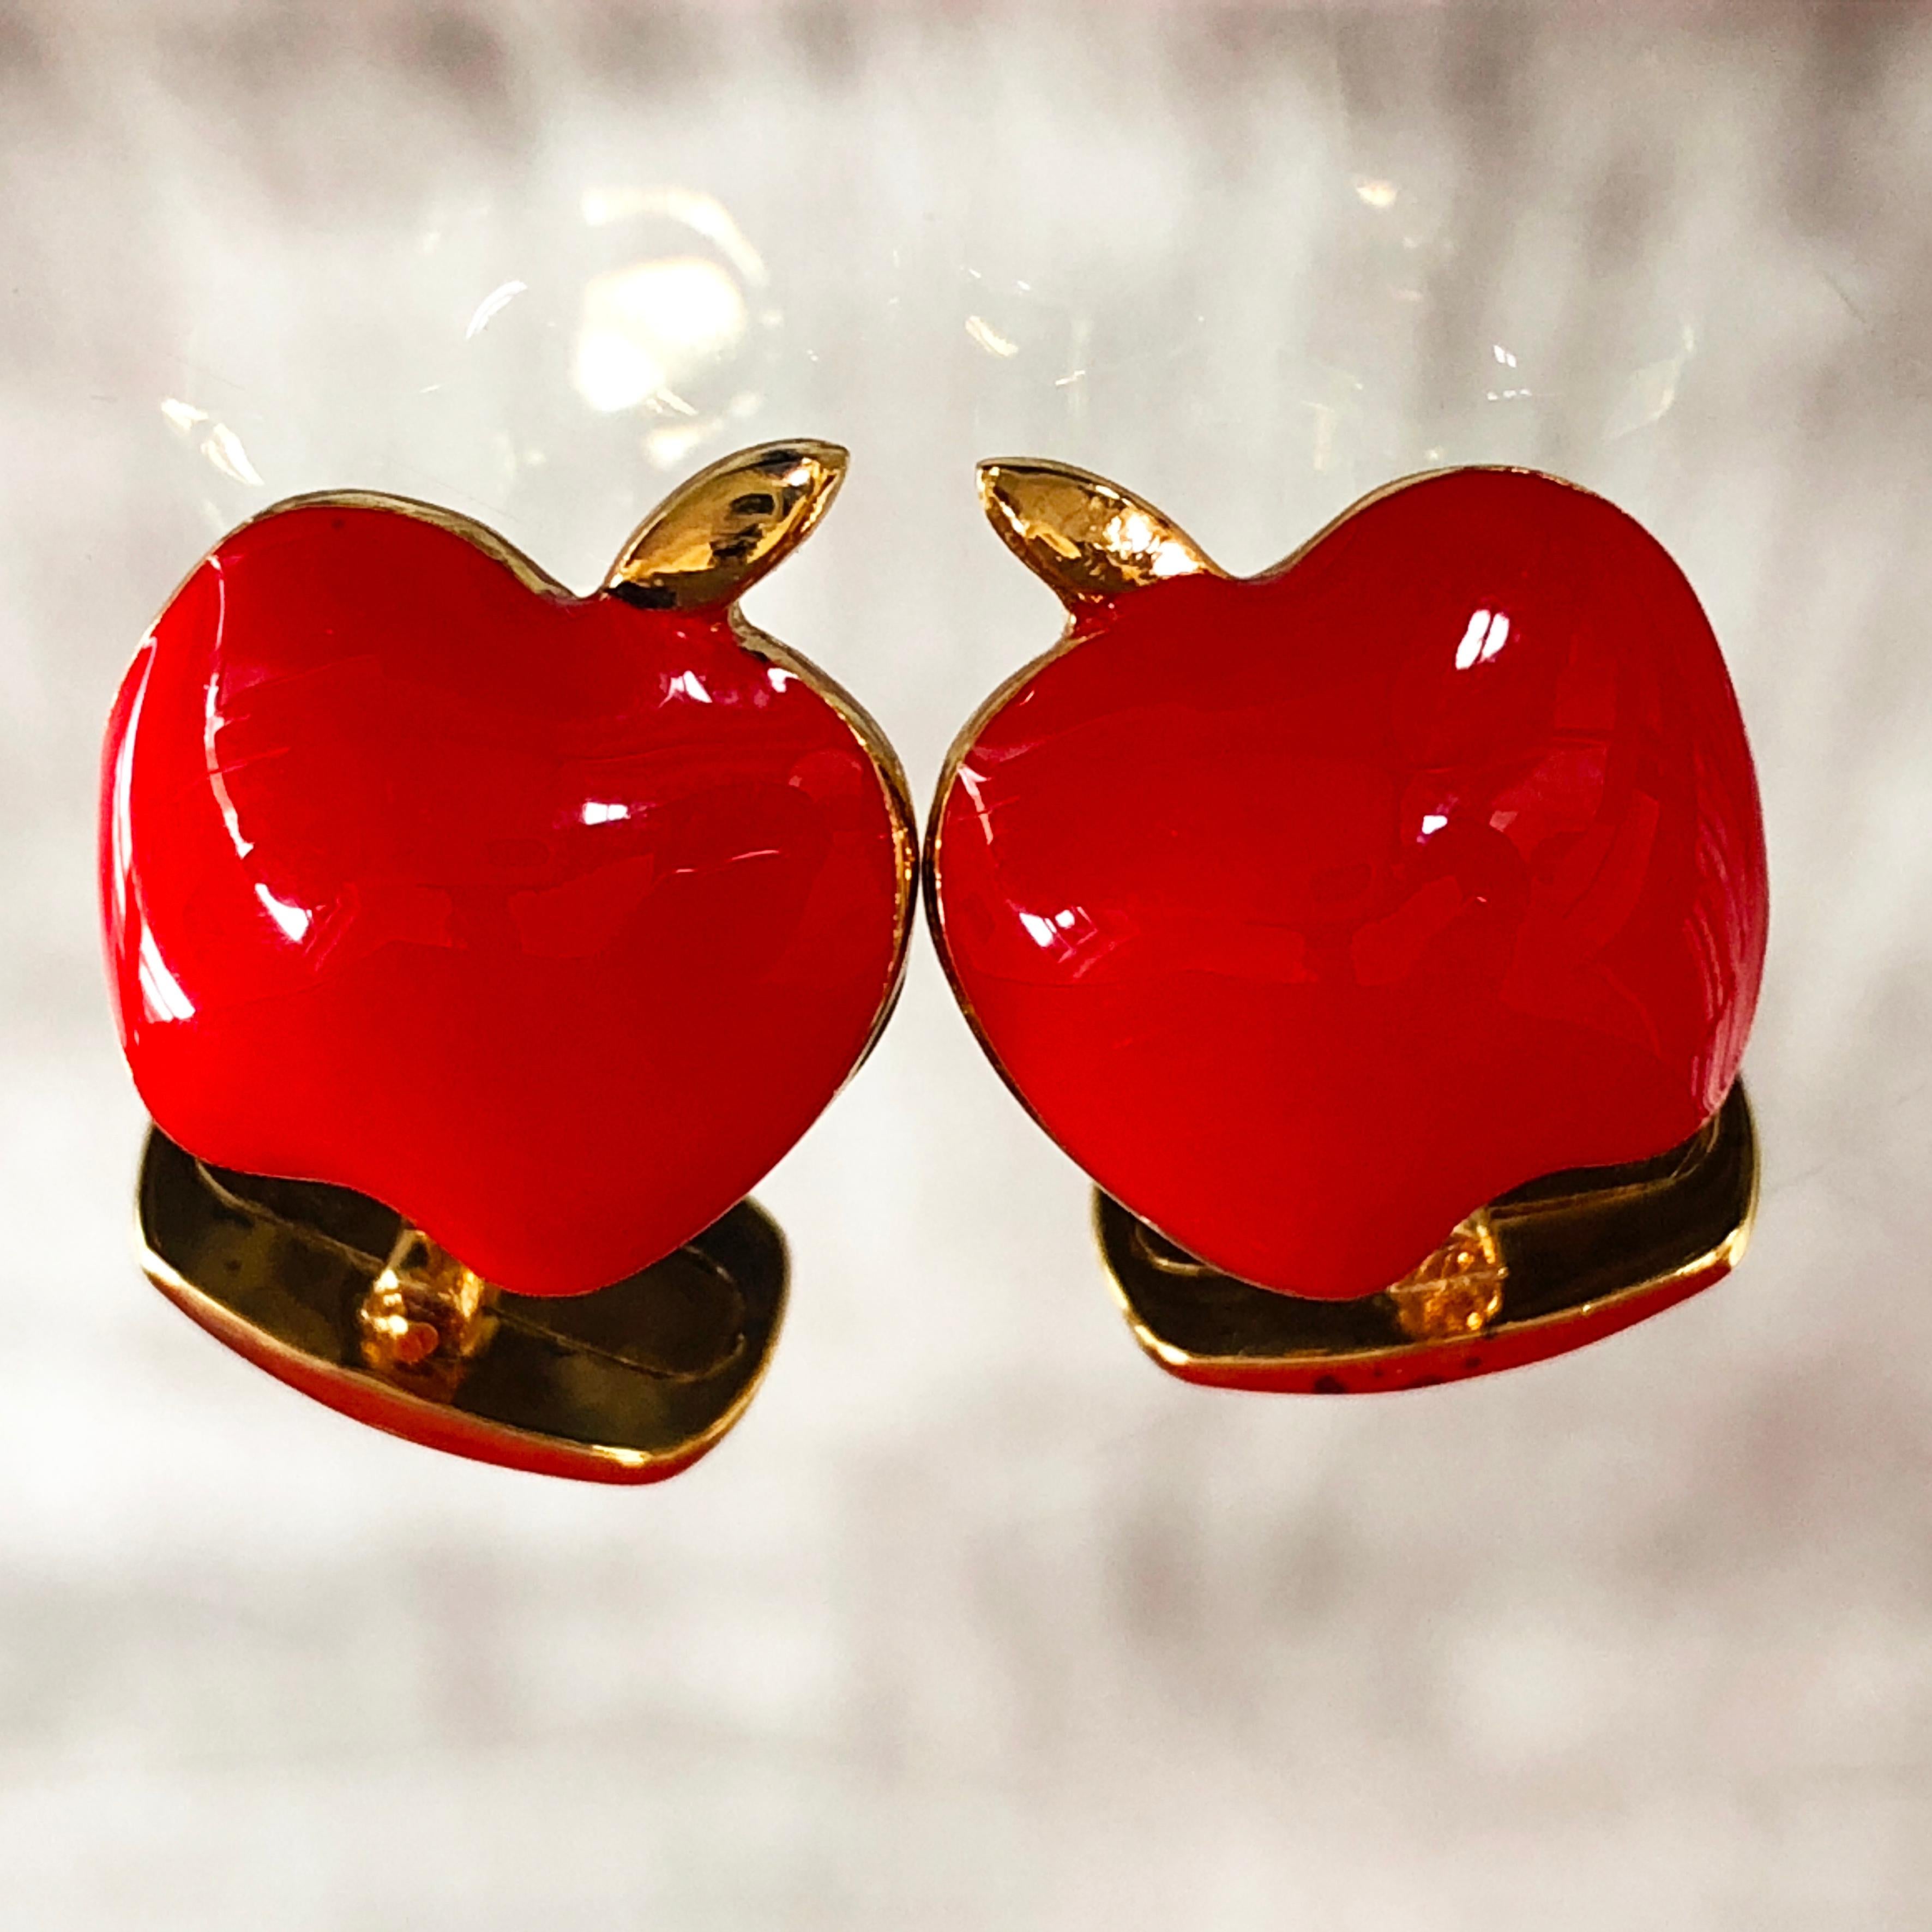 Contemporary Berca Red Hand Enameled Apple Shaped Sterling Silver Gold-Plated Cufflinks